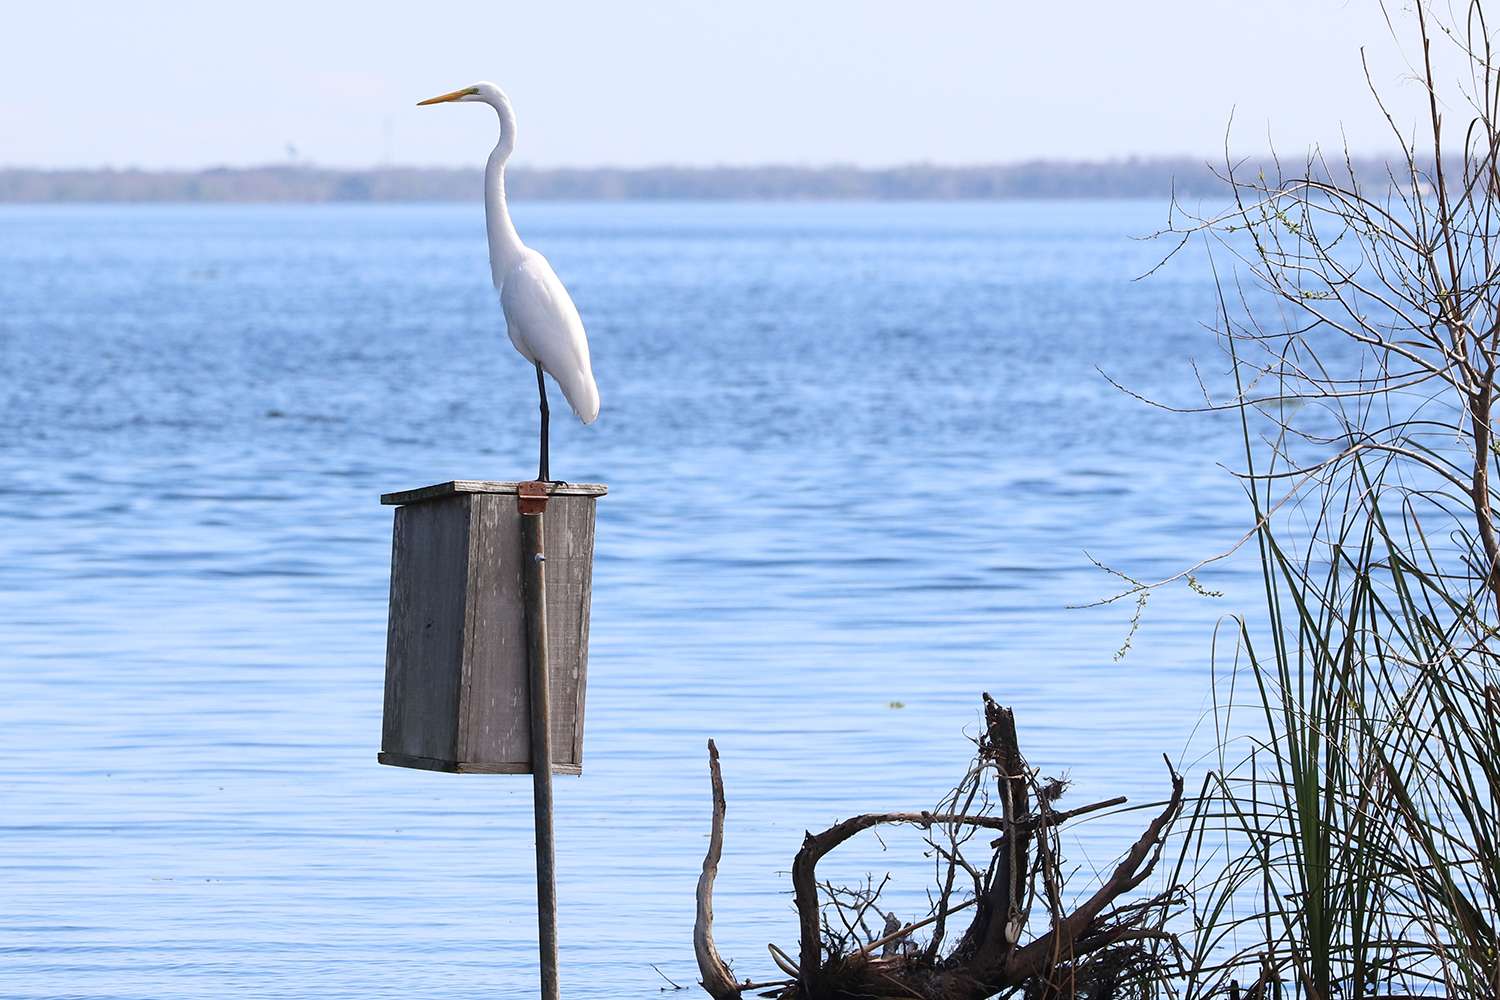 Egret standing on a wood duck box, St. Johns River, 2019.